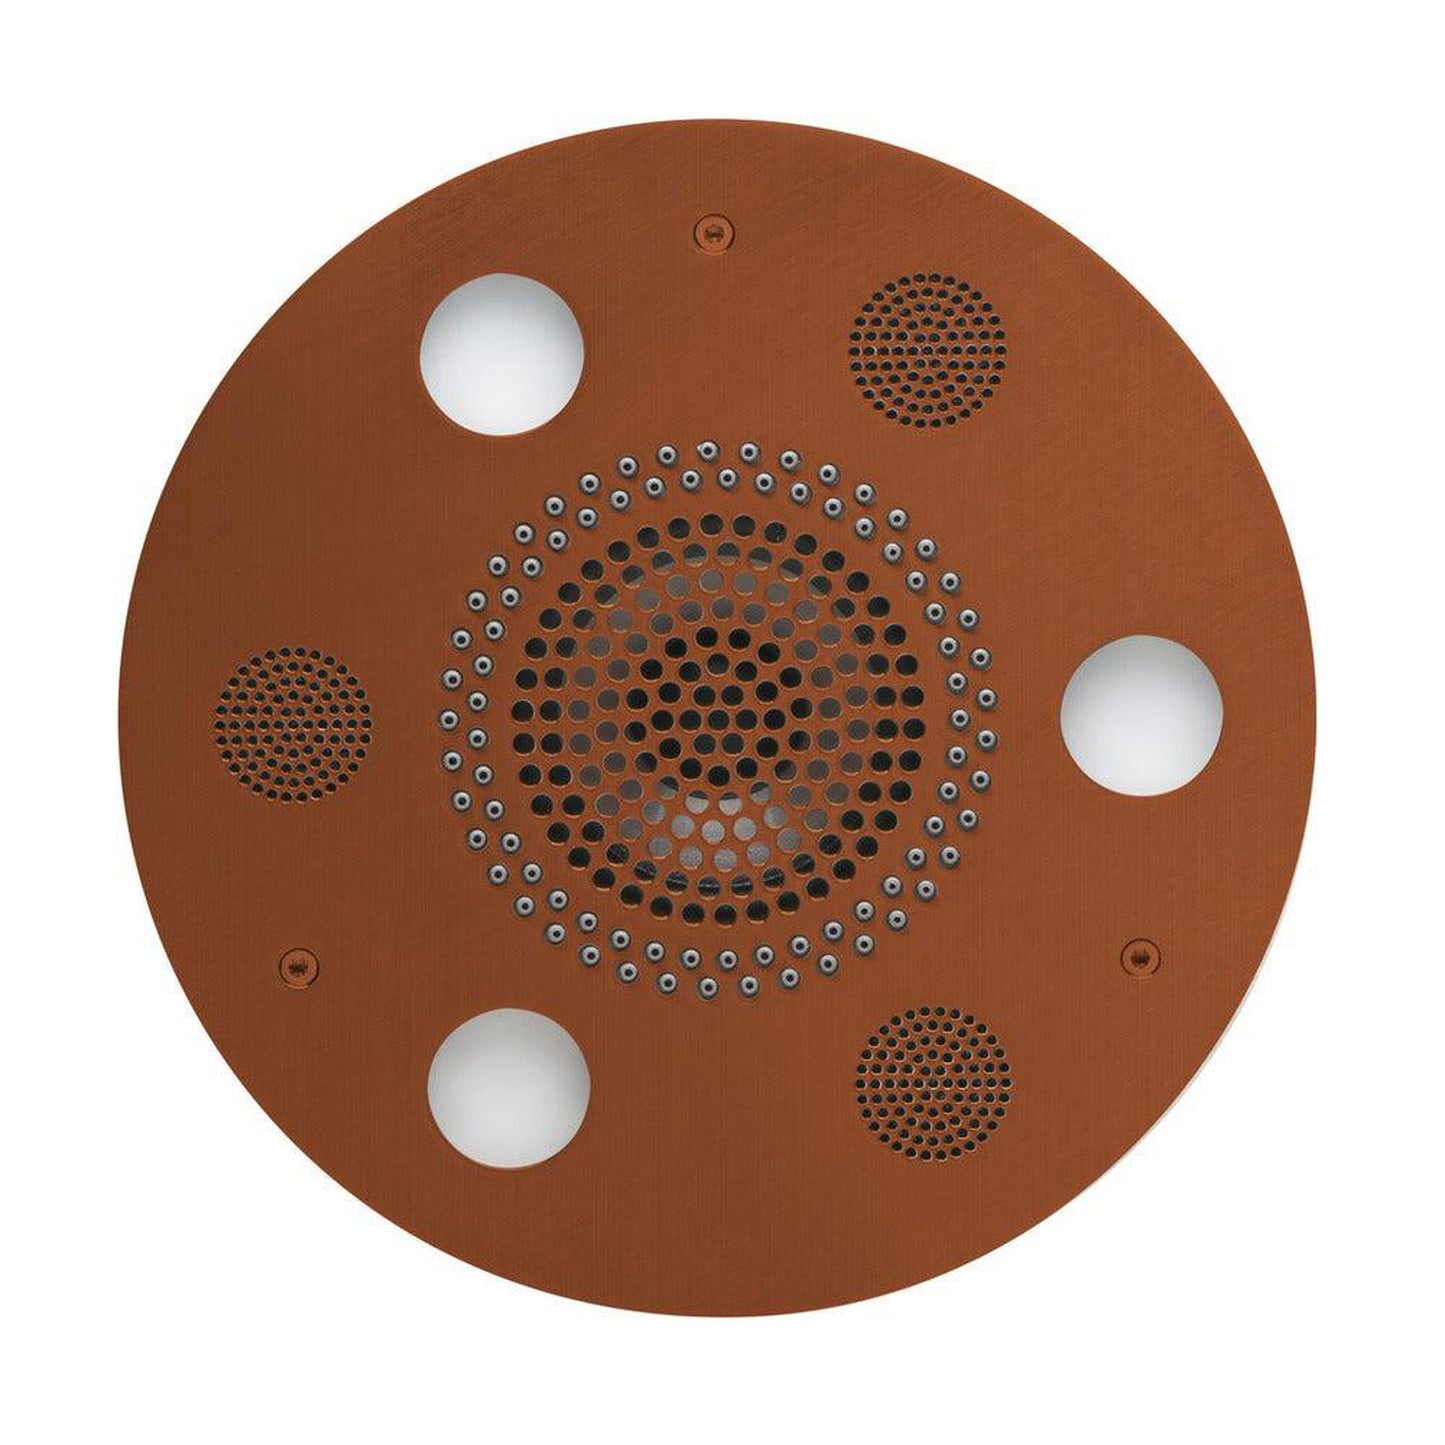 ThermaSol 10" Antique Copper Finish Round Serenity Advanced Light, Sound and Rain System